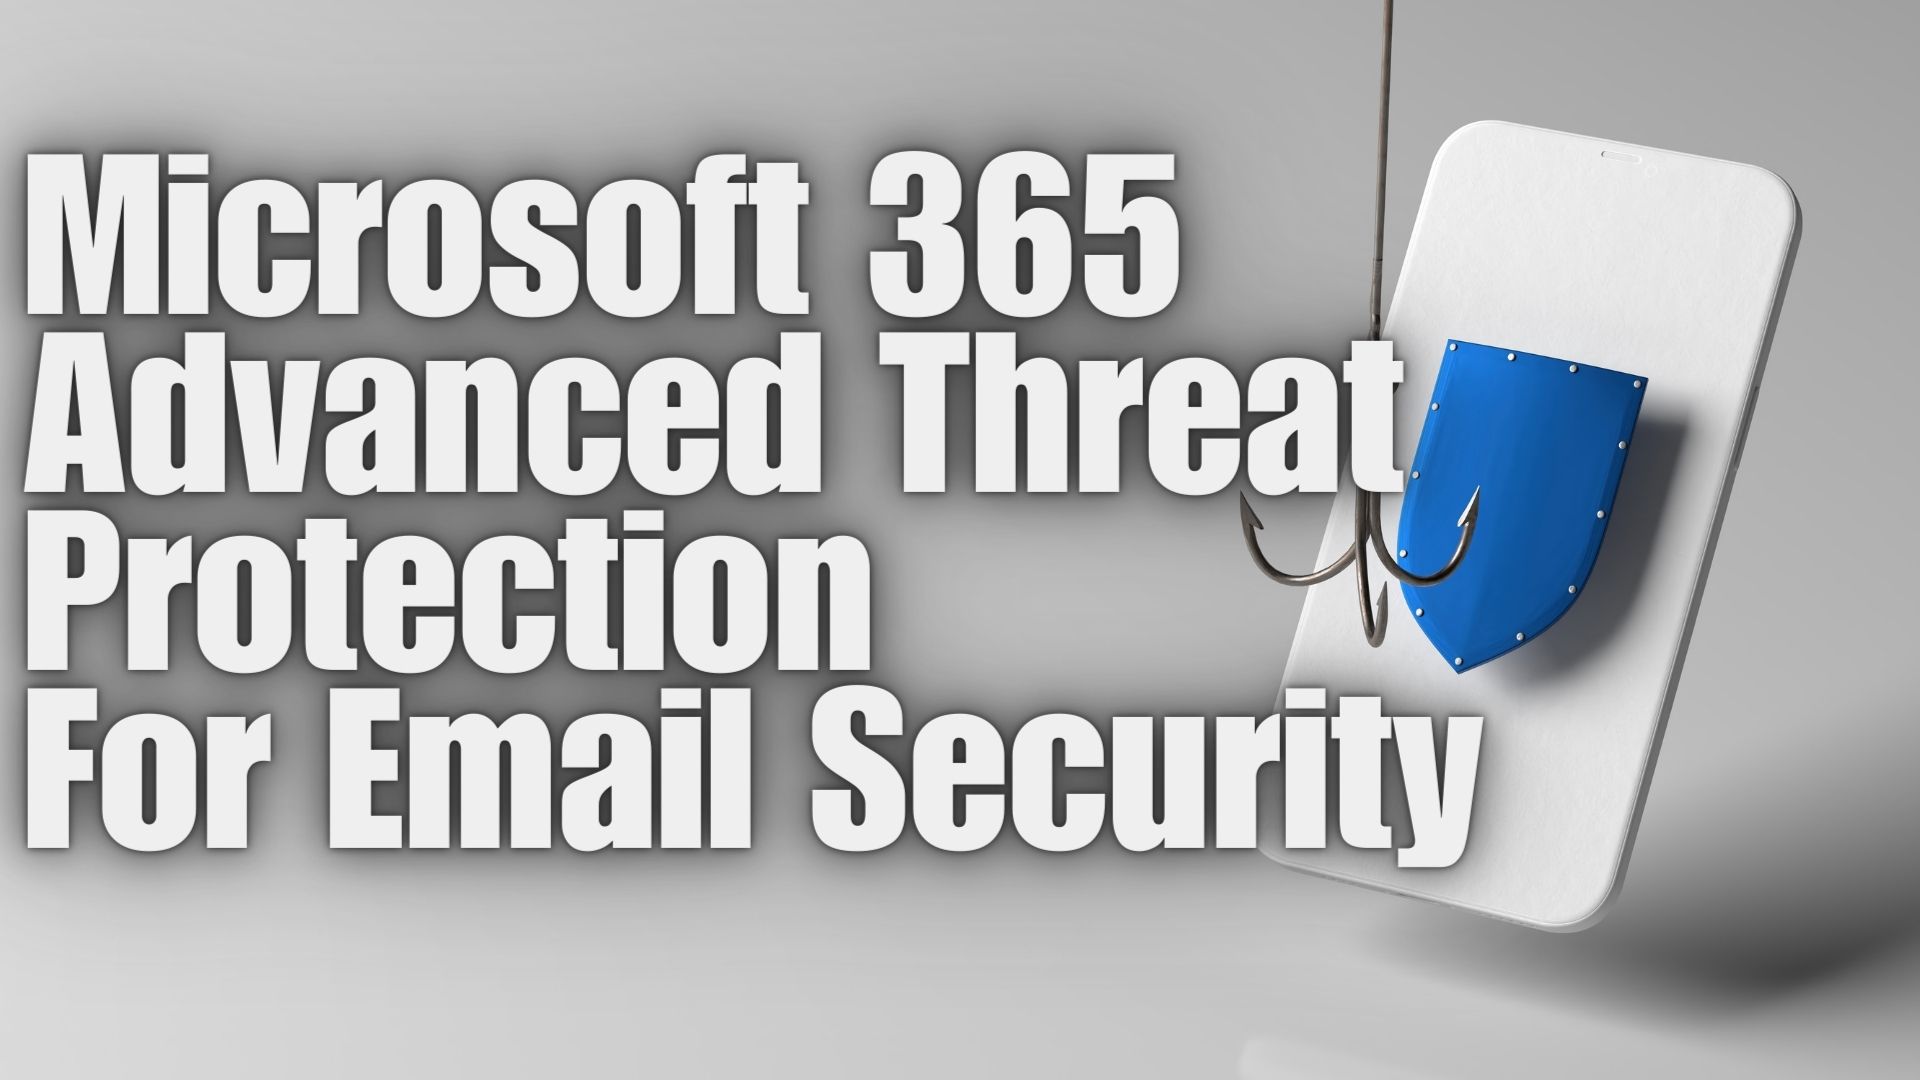 Microsoft Office 365 Advanced Threat Protection for Email Security